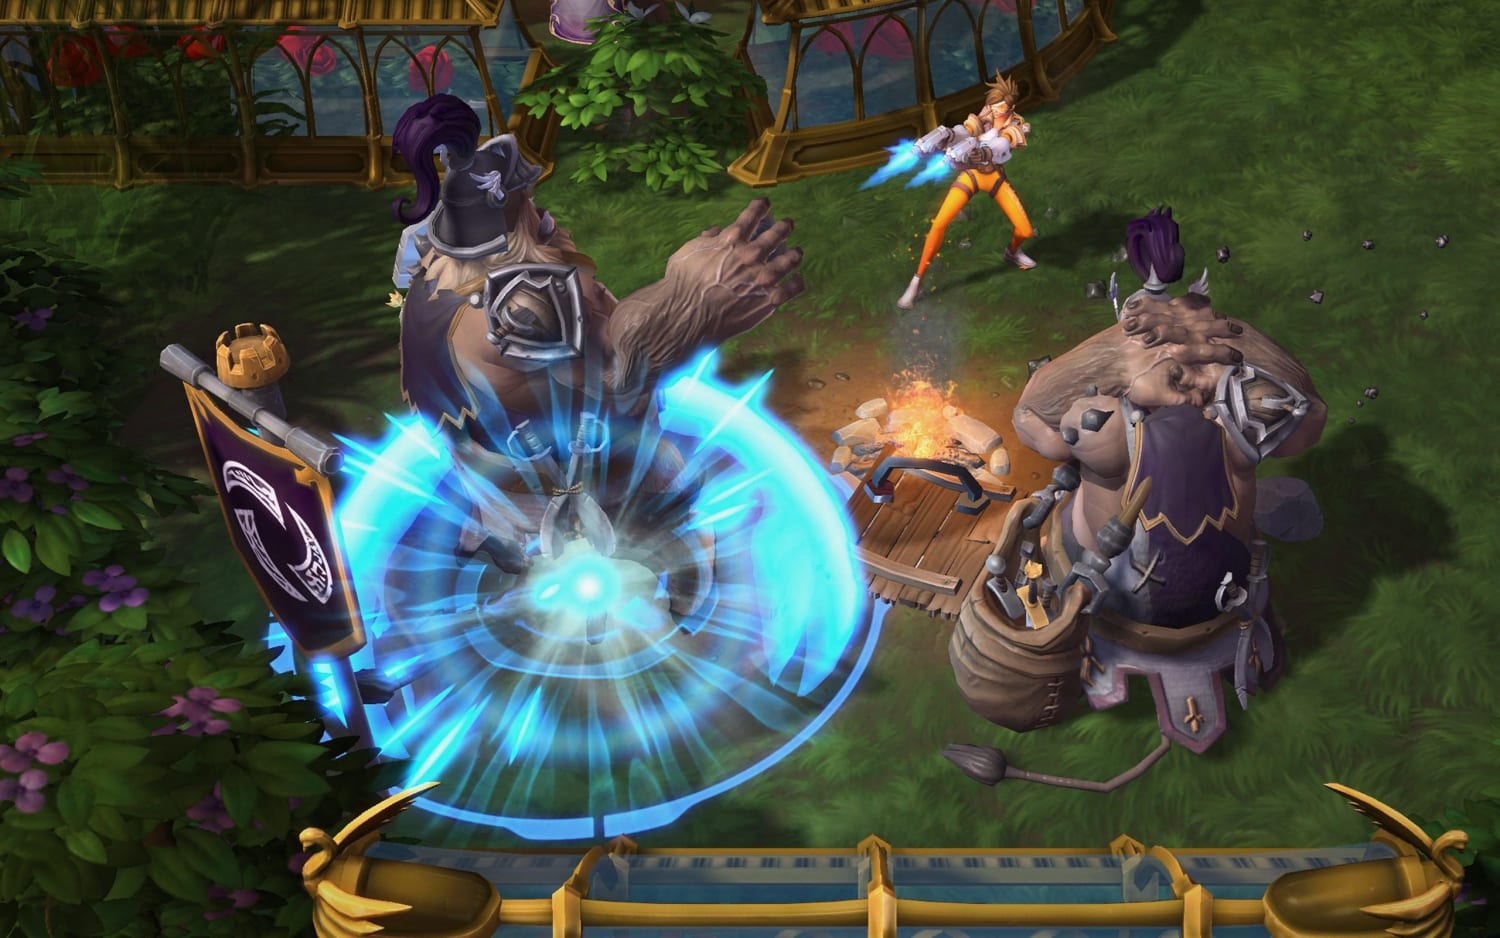 Heroes of the Storm designer: Tips for winning with Cho'gall, the